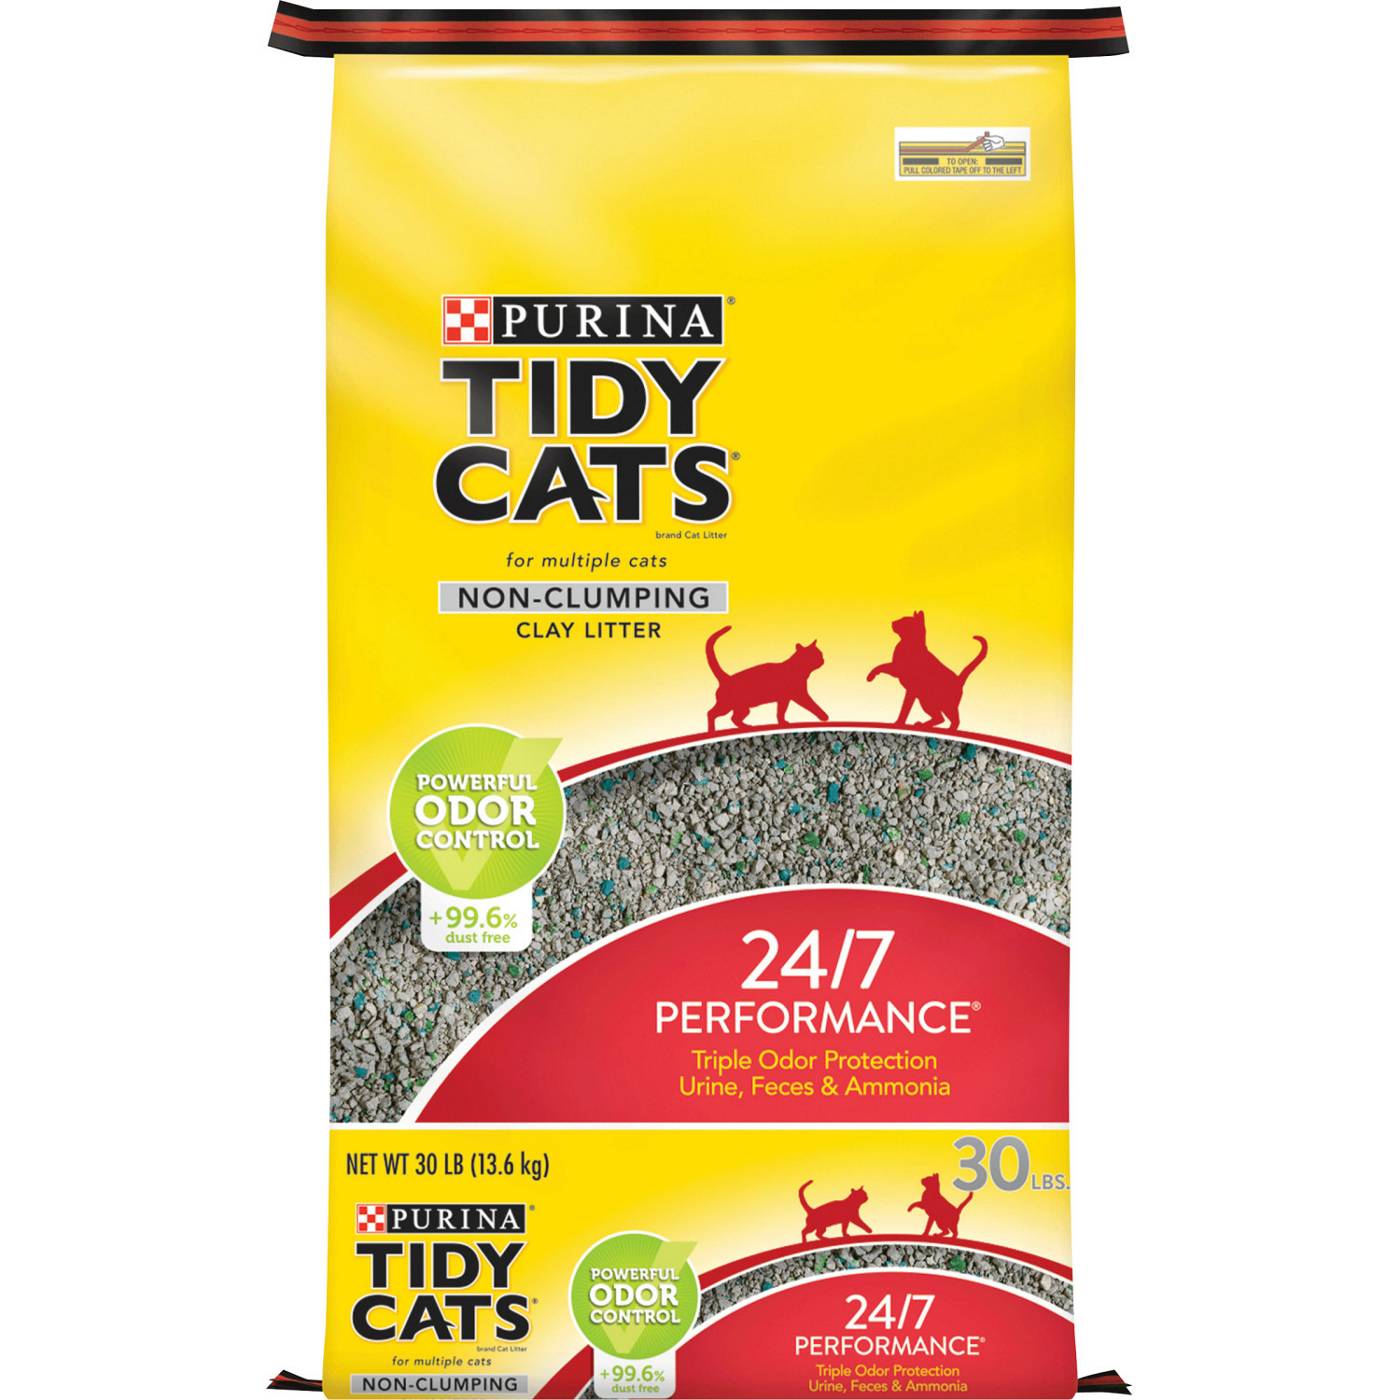 Tidy Cats Purina Tidy Cats Non Clumping Cat Litter, 24/7 Performance Multi Cat Litter; image 1 of 4